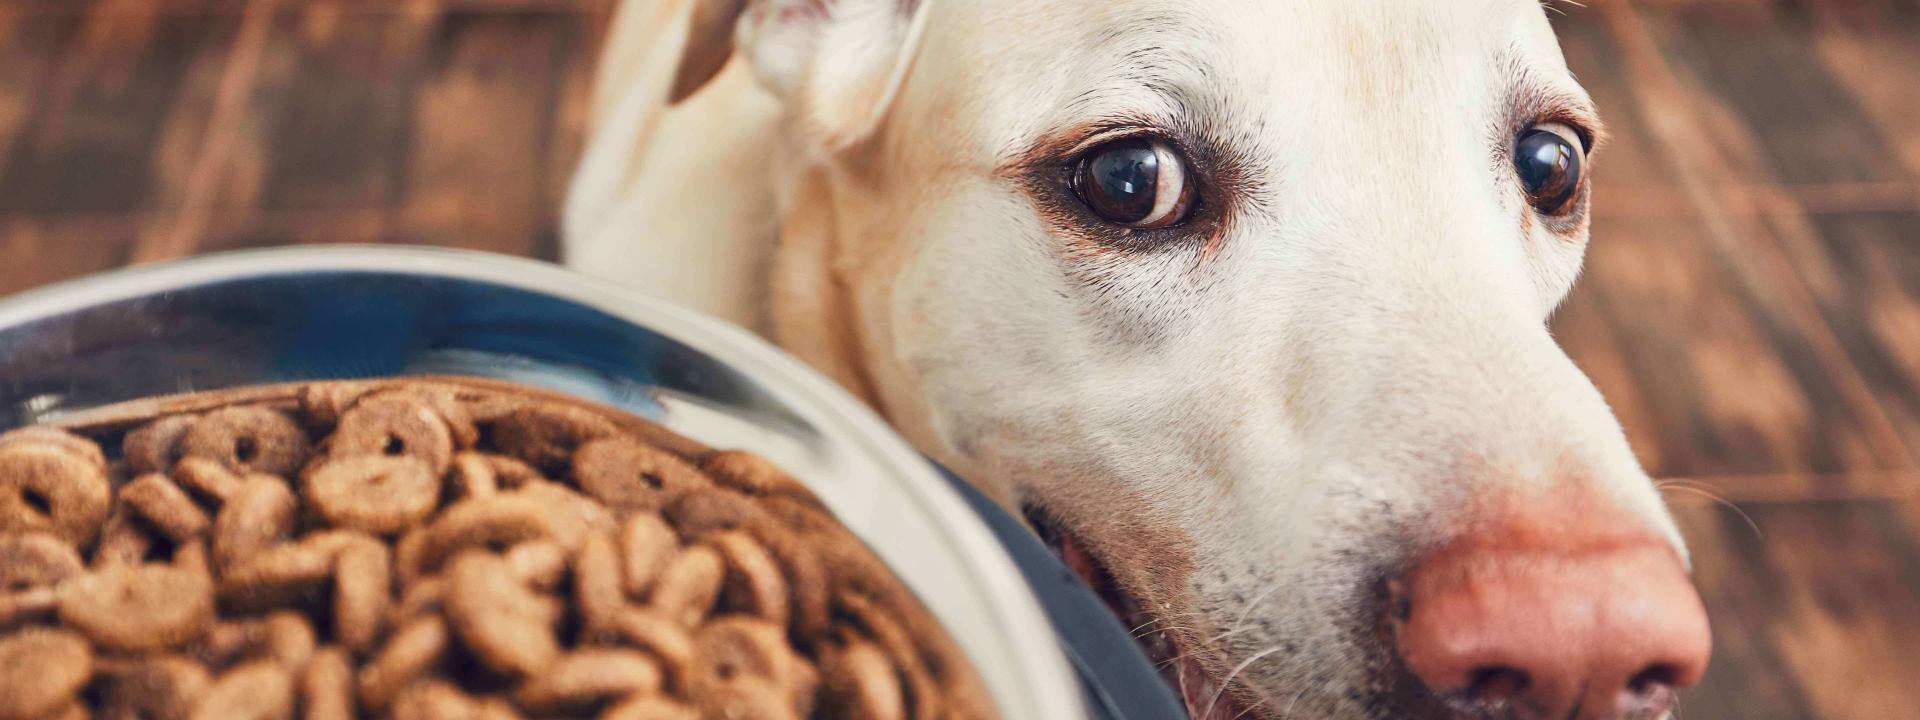 dogs-digest-carbohydrates.jpg